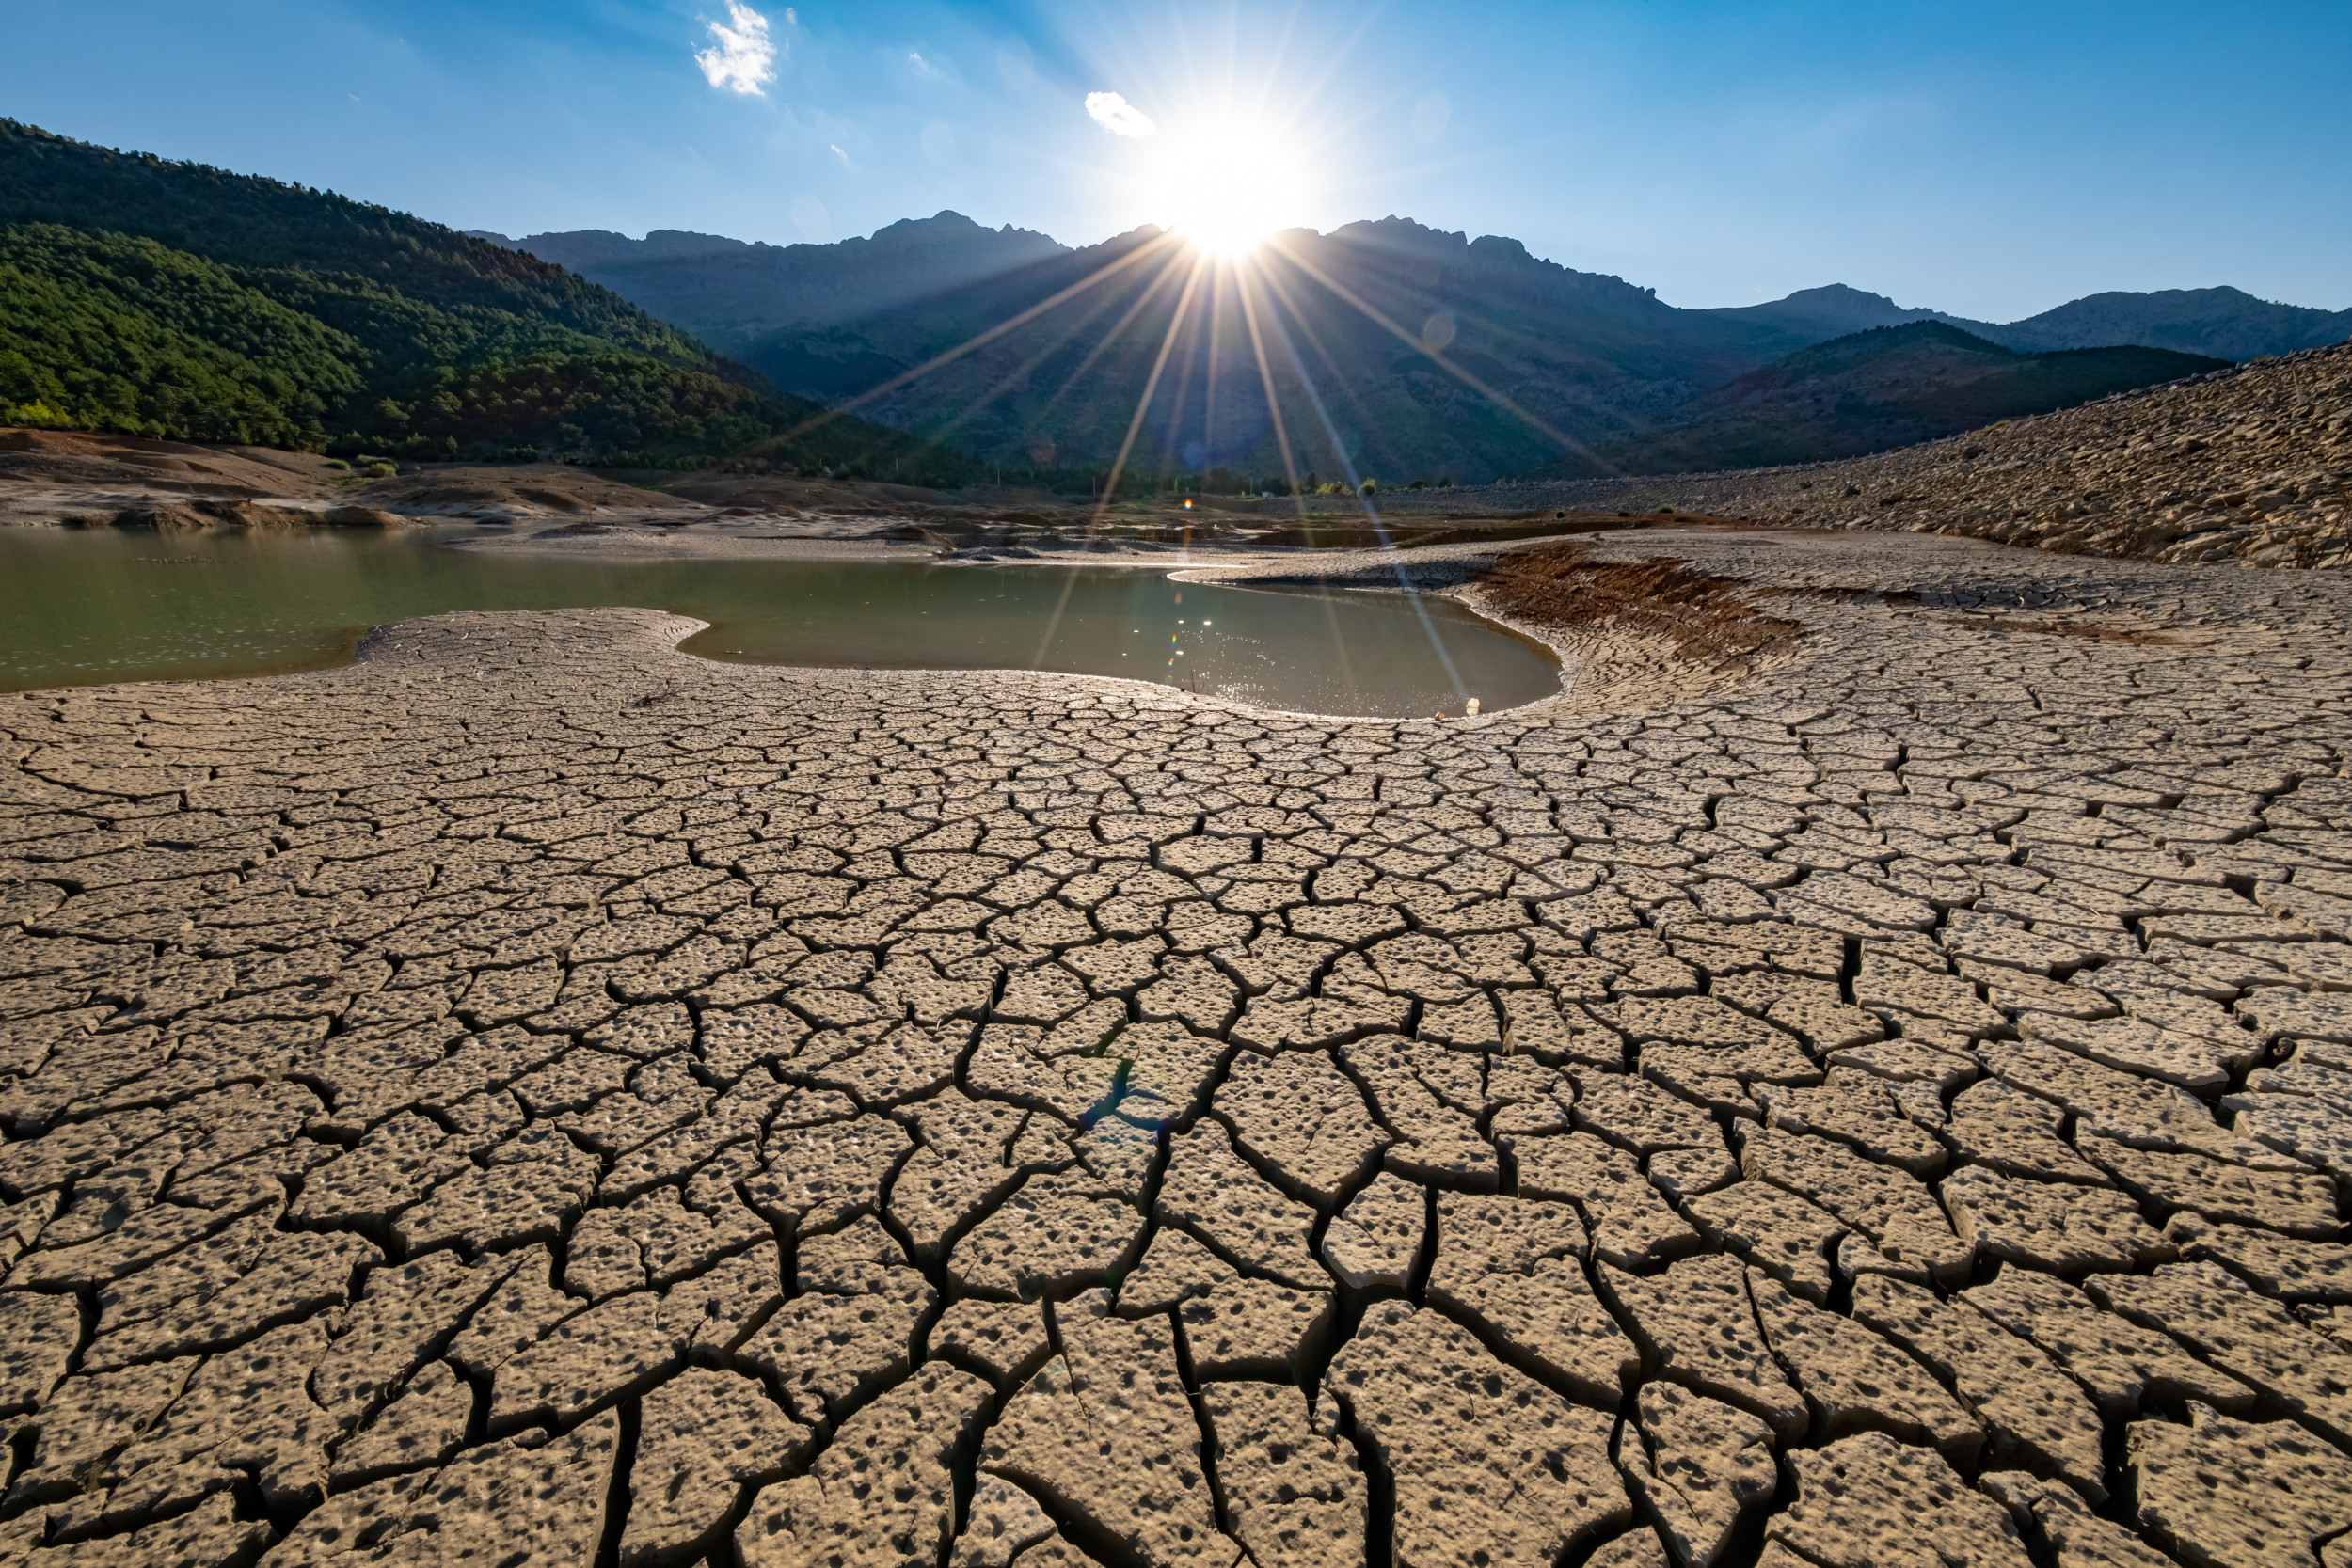 California’s Droughts